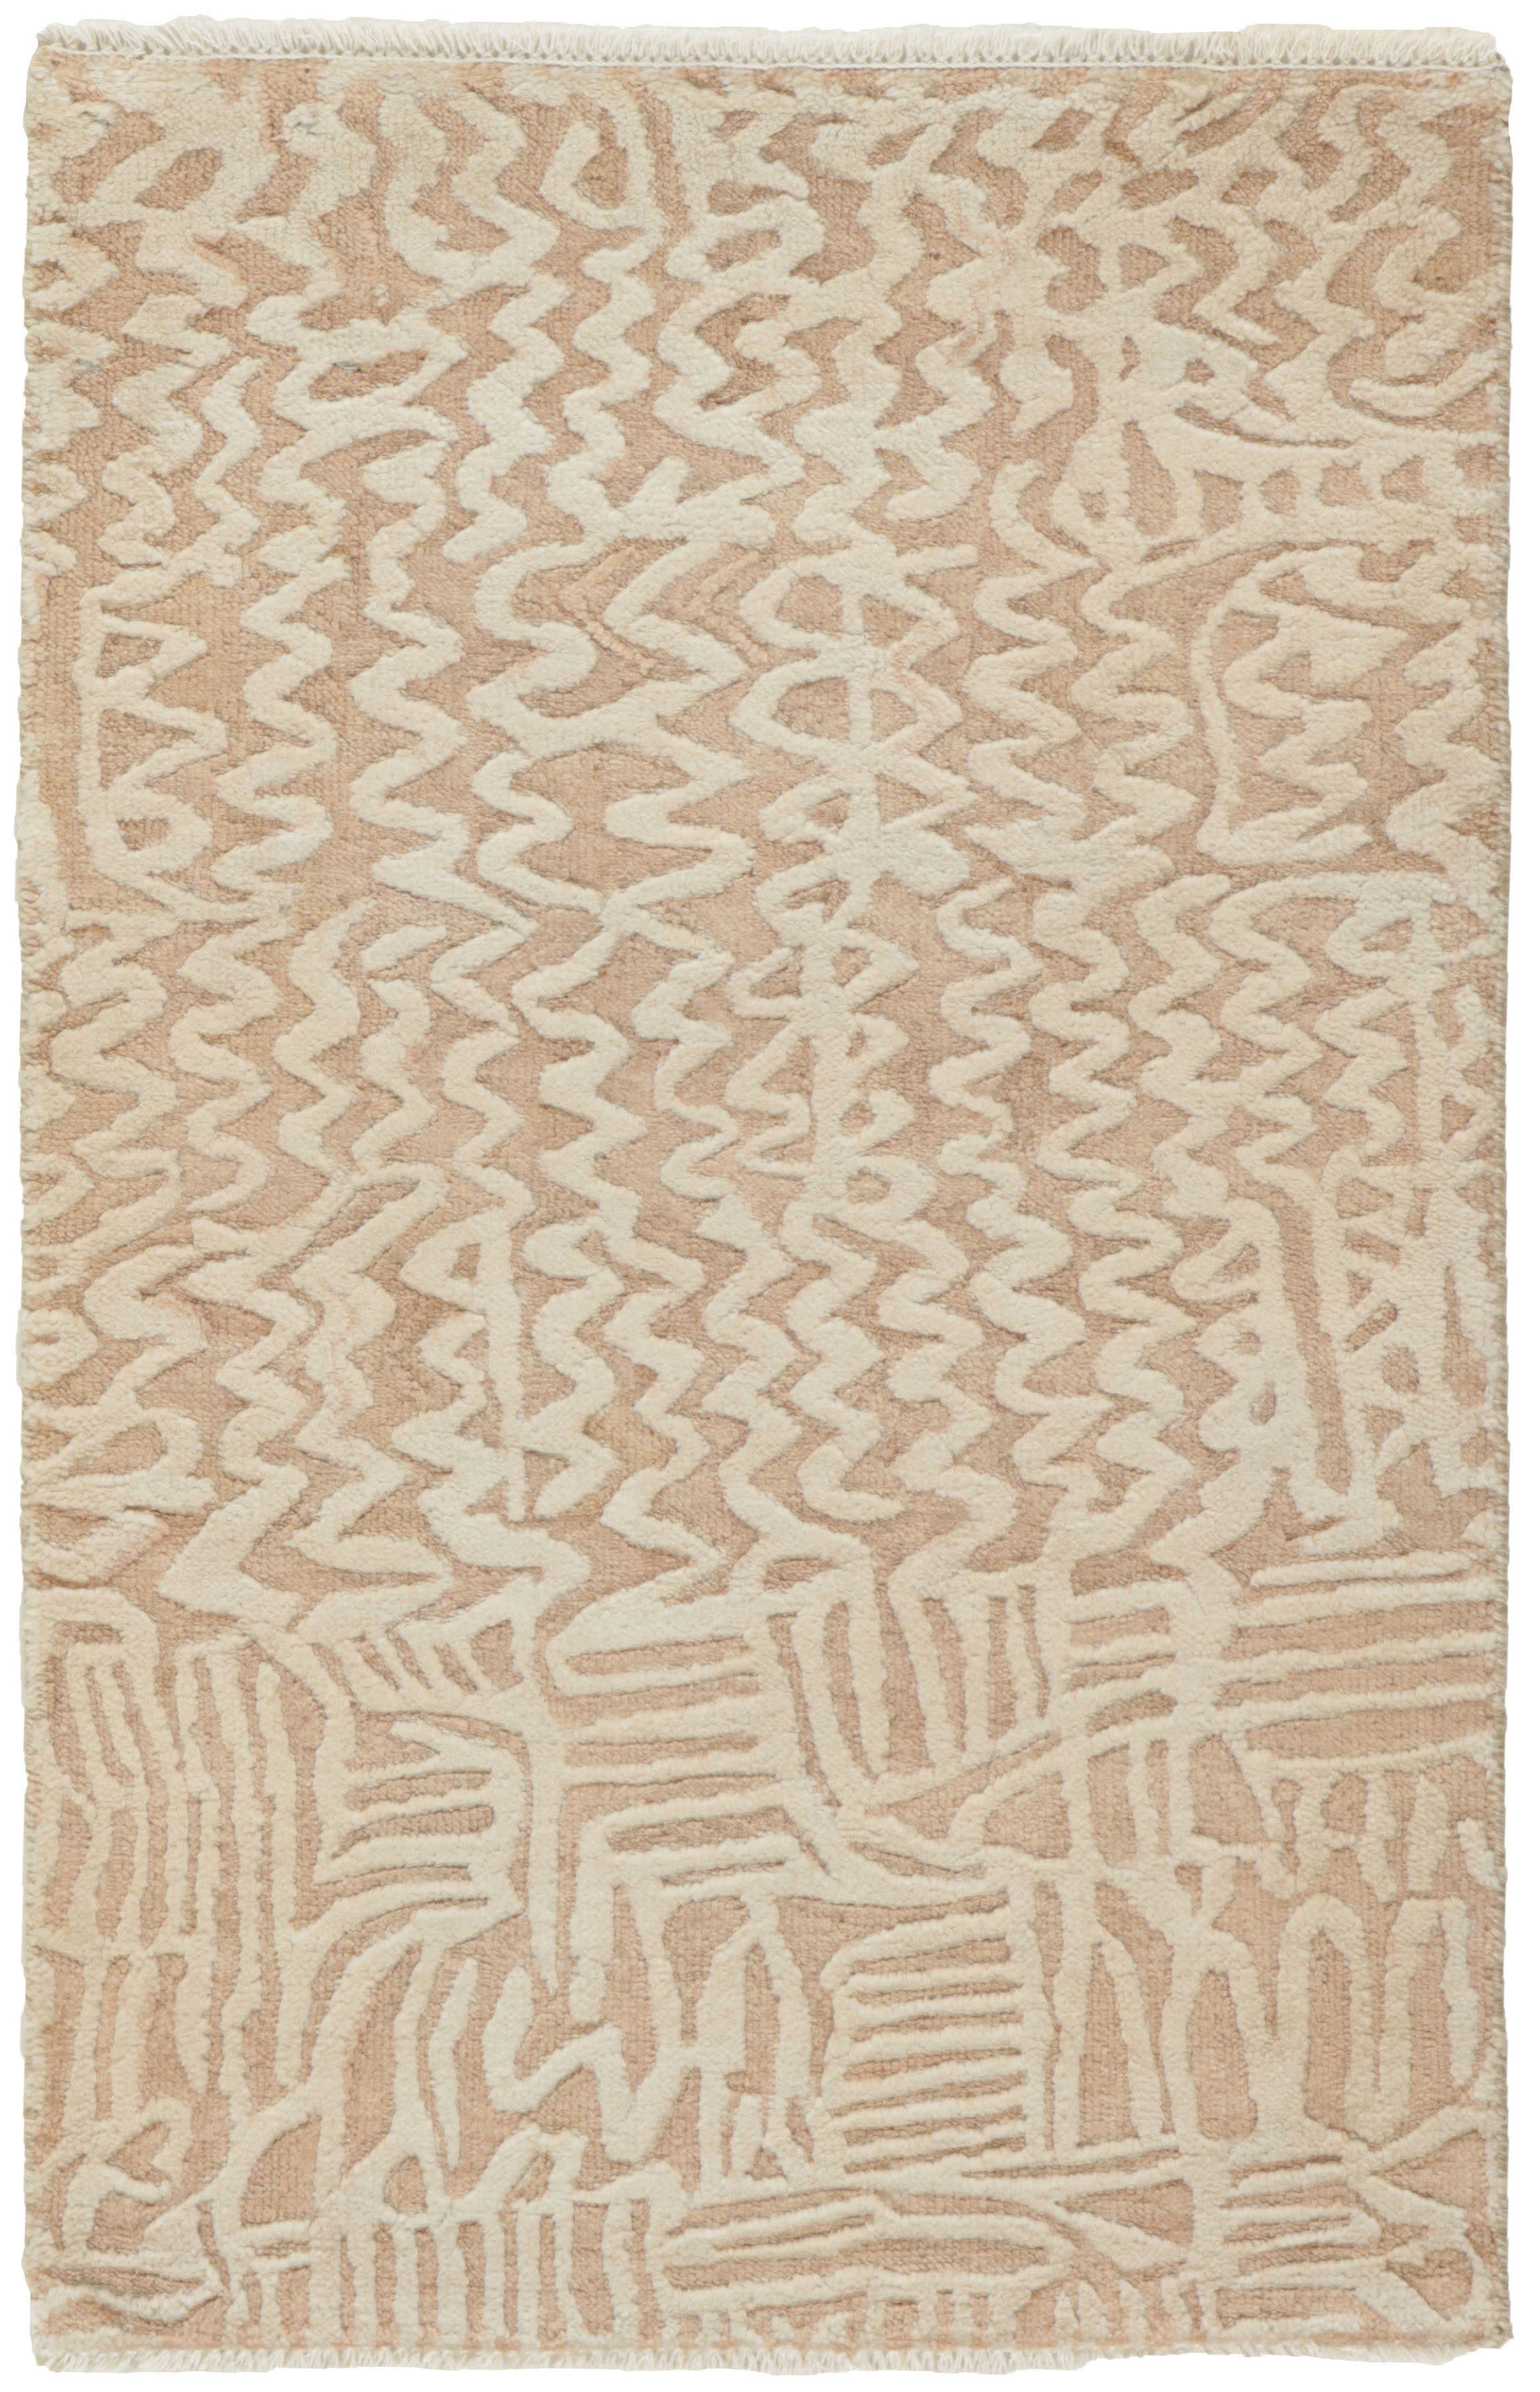 Authentic oriental rug with a damask pattern in beige and ivory